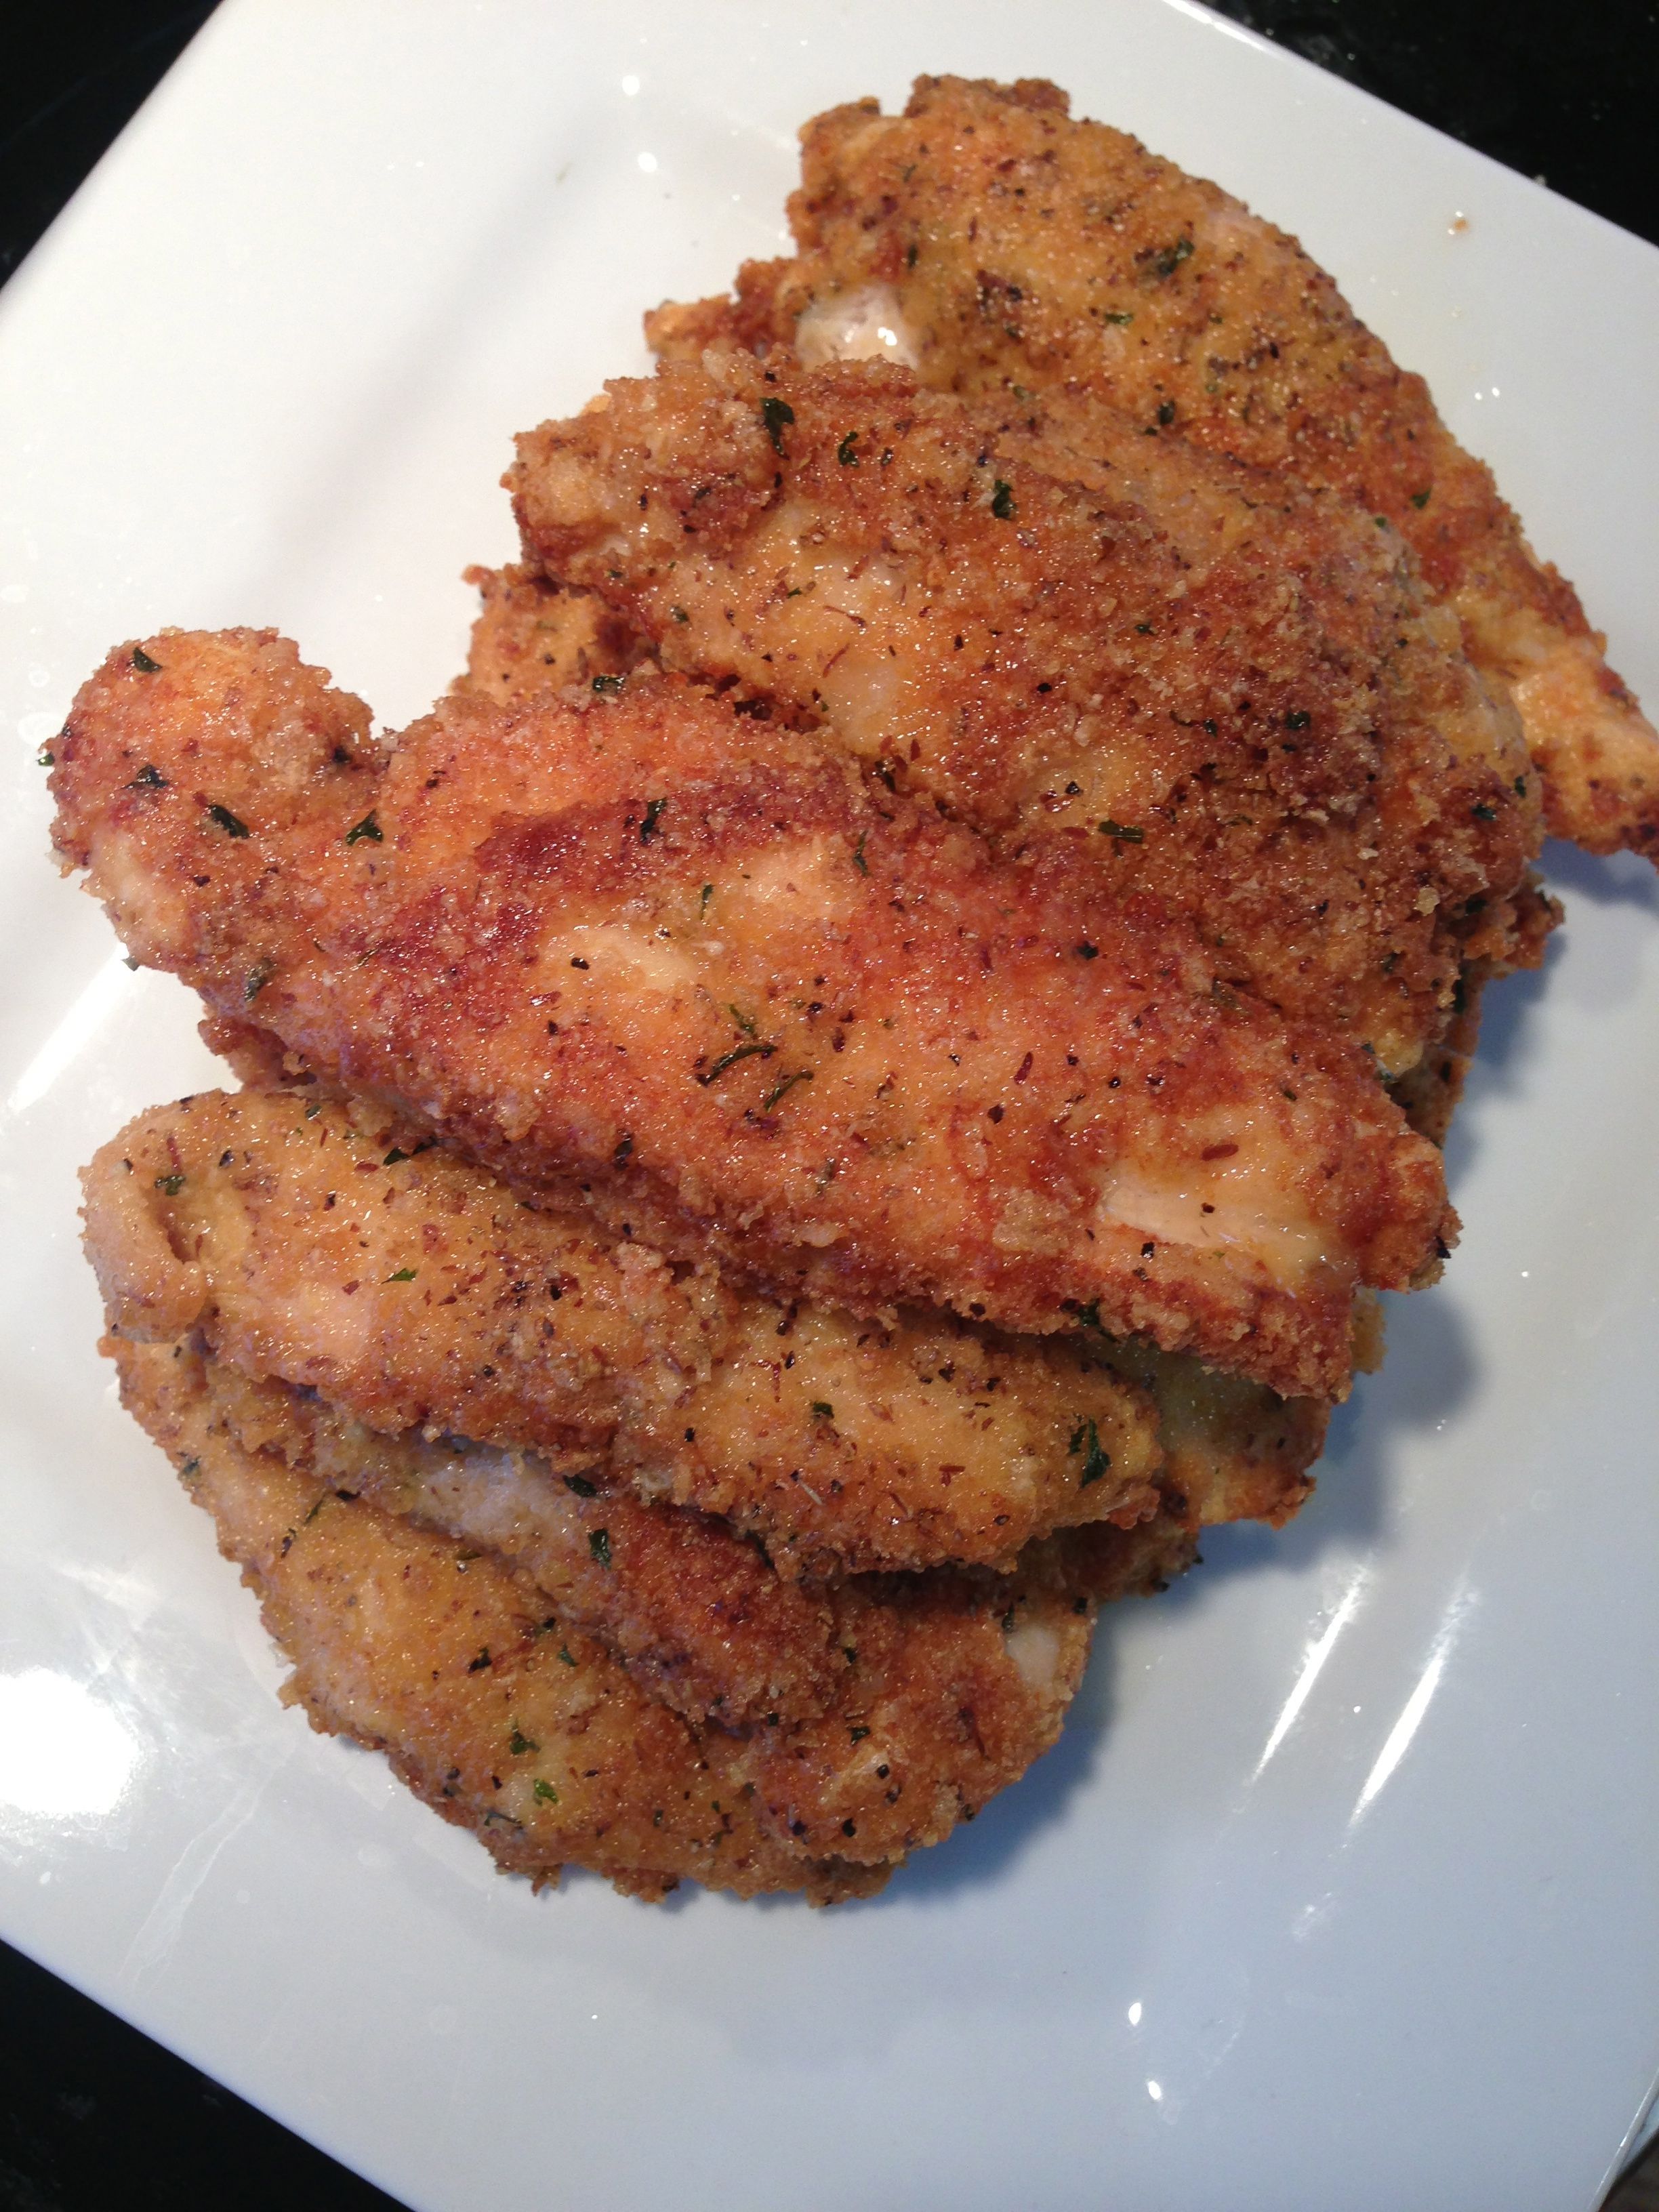 Best Chicken Fingers! Gluten Free and Low Carb. No processed junk, just real, yu